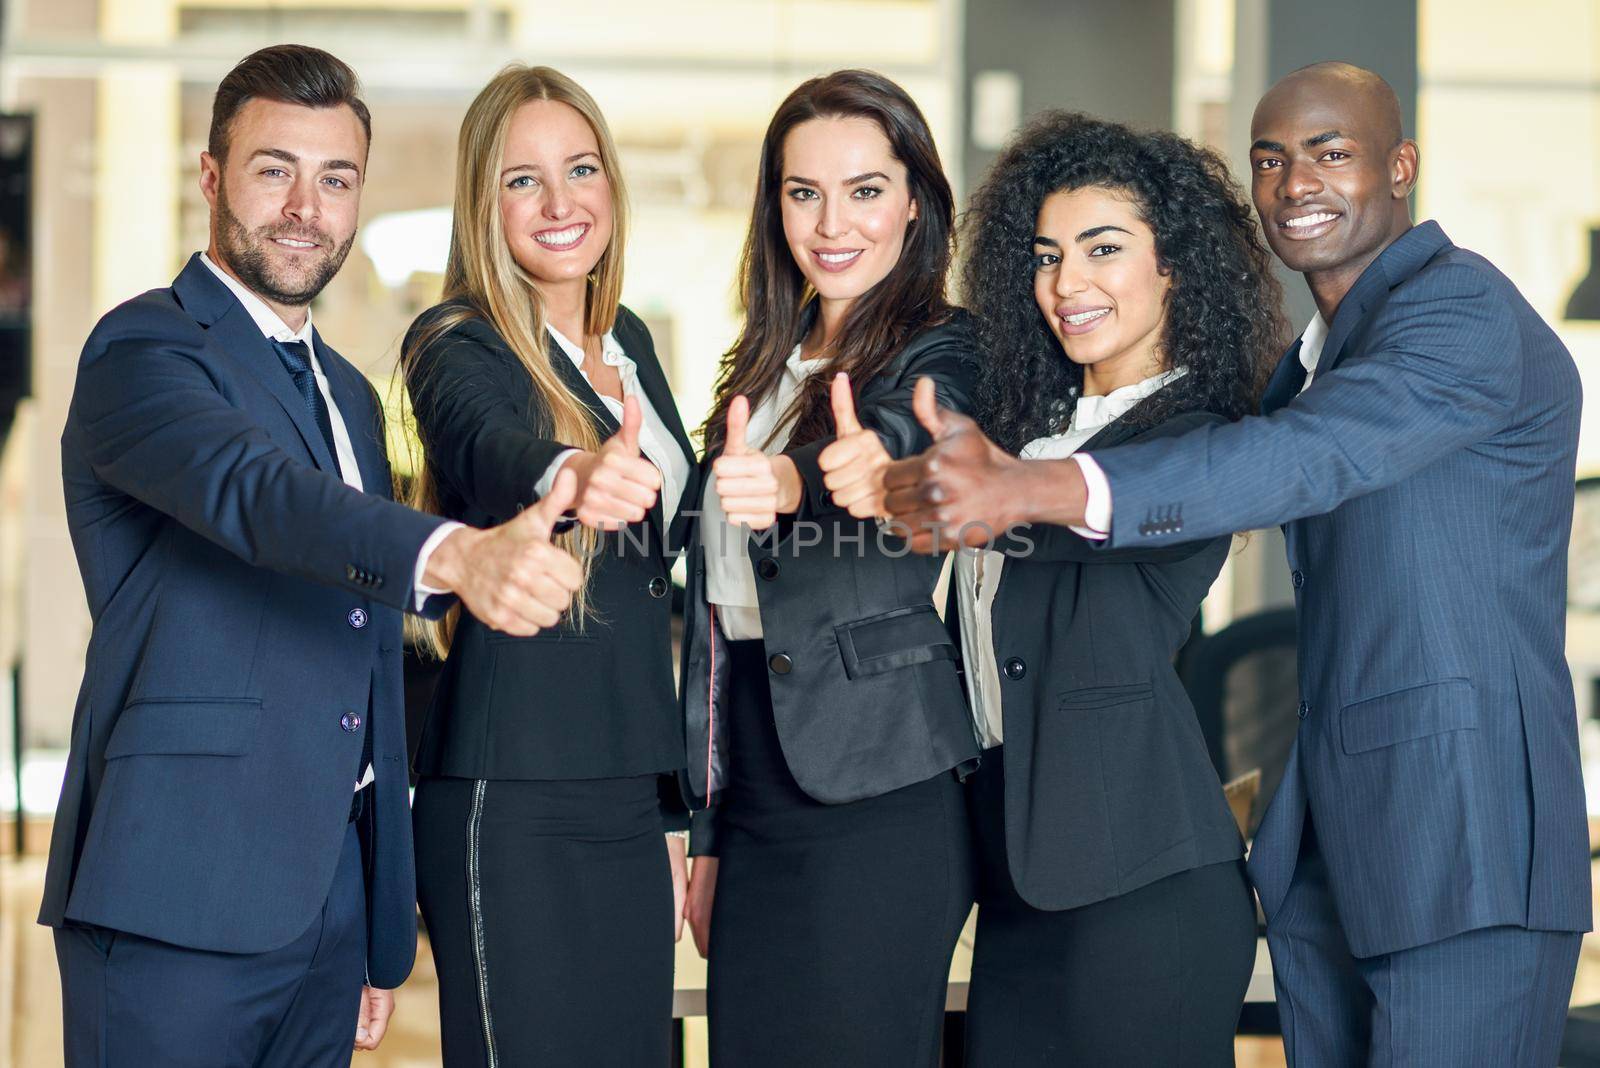 Group of businesspeople with thumbs up gesture in modern office. by javiindy